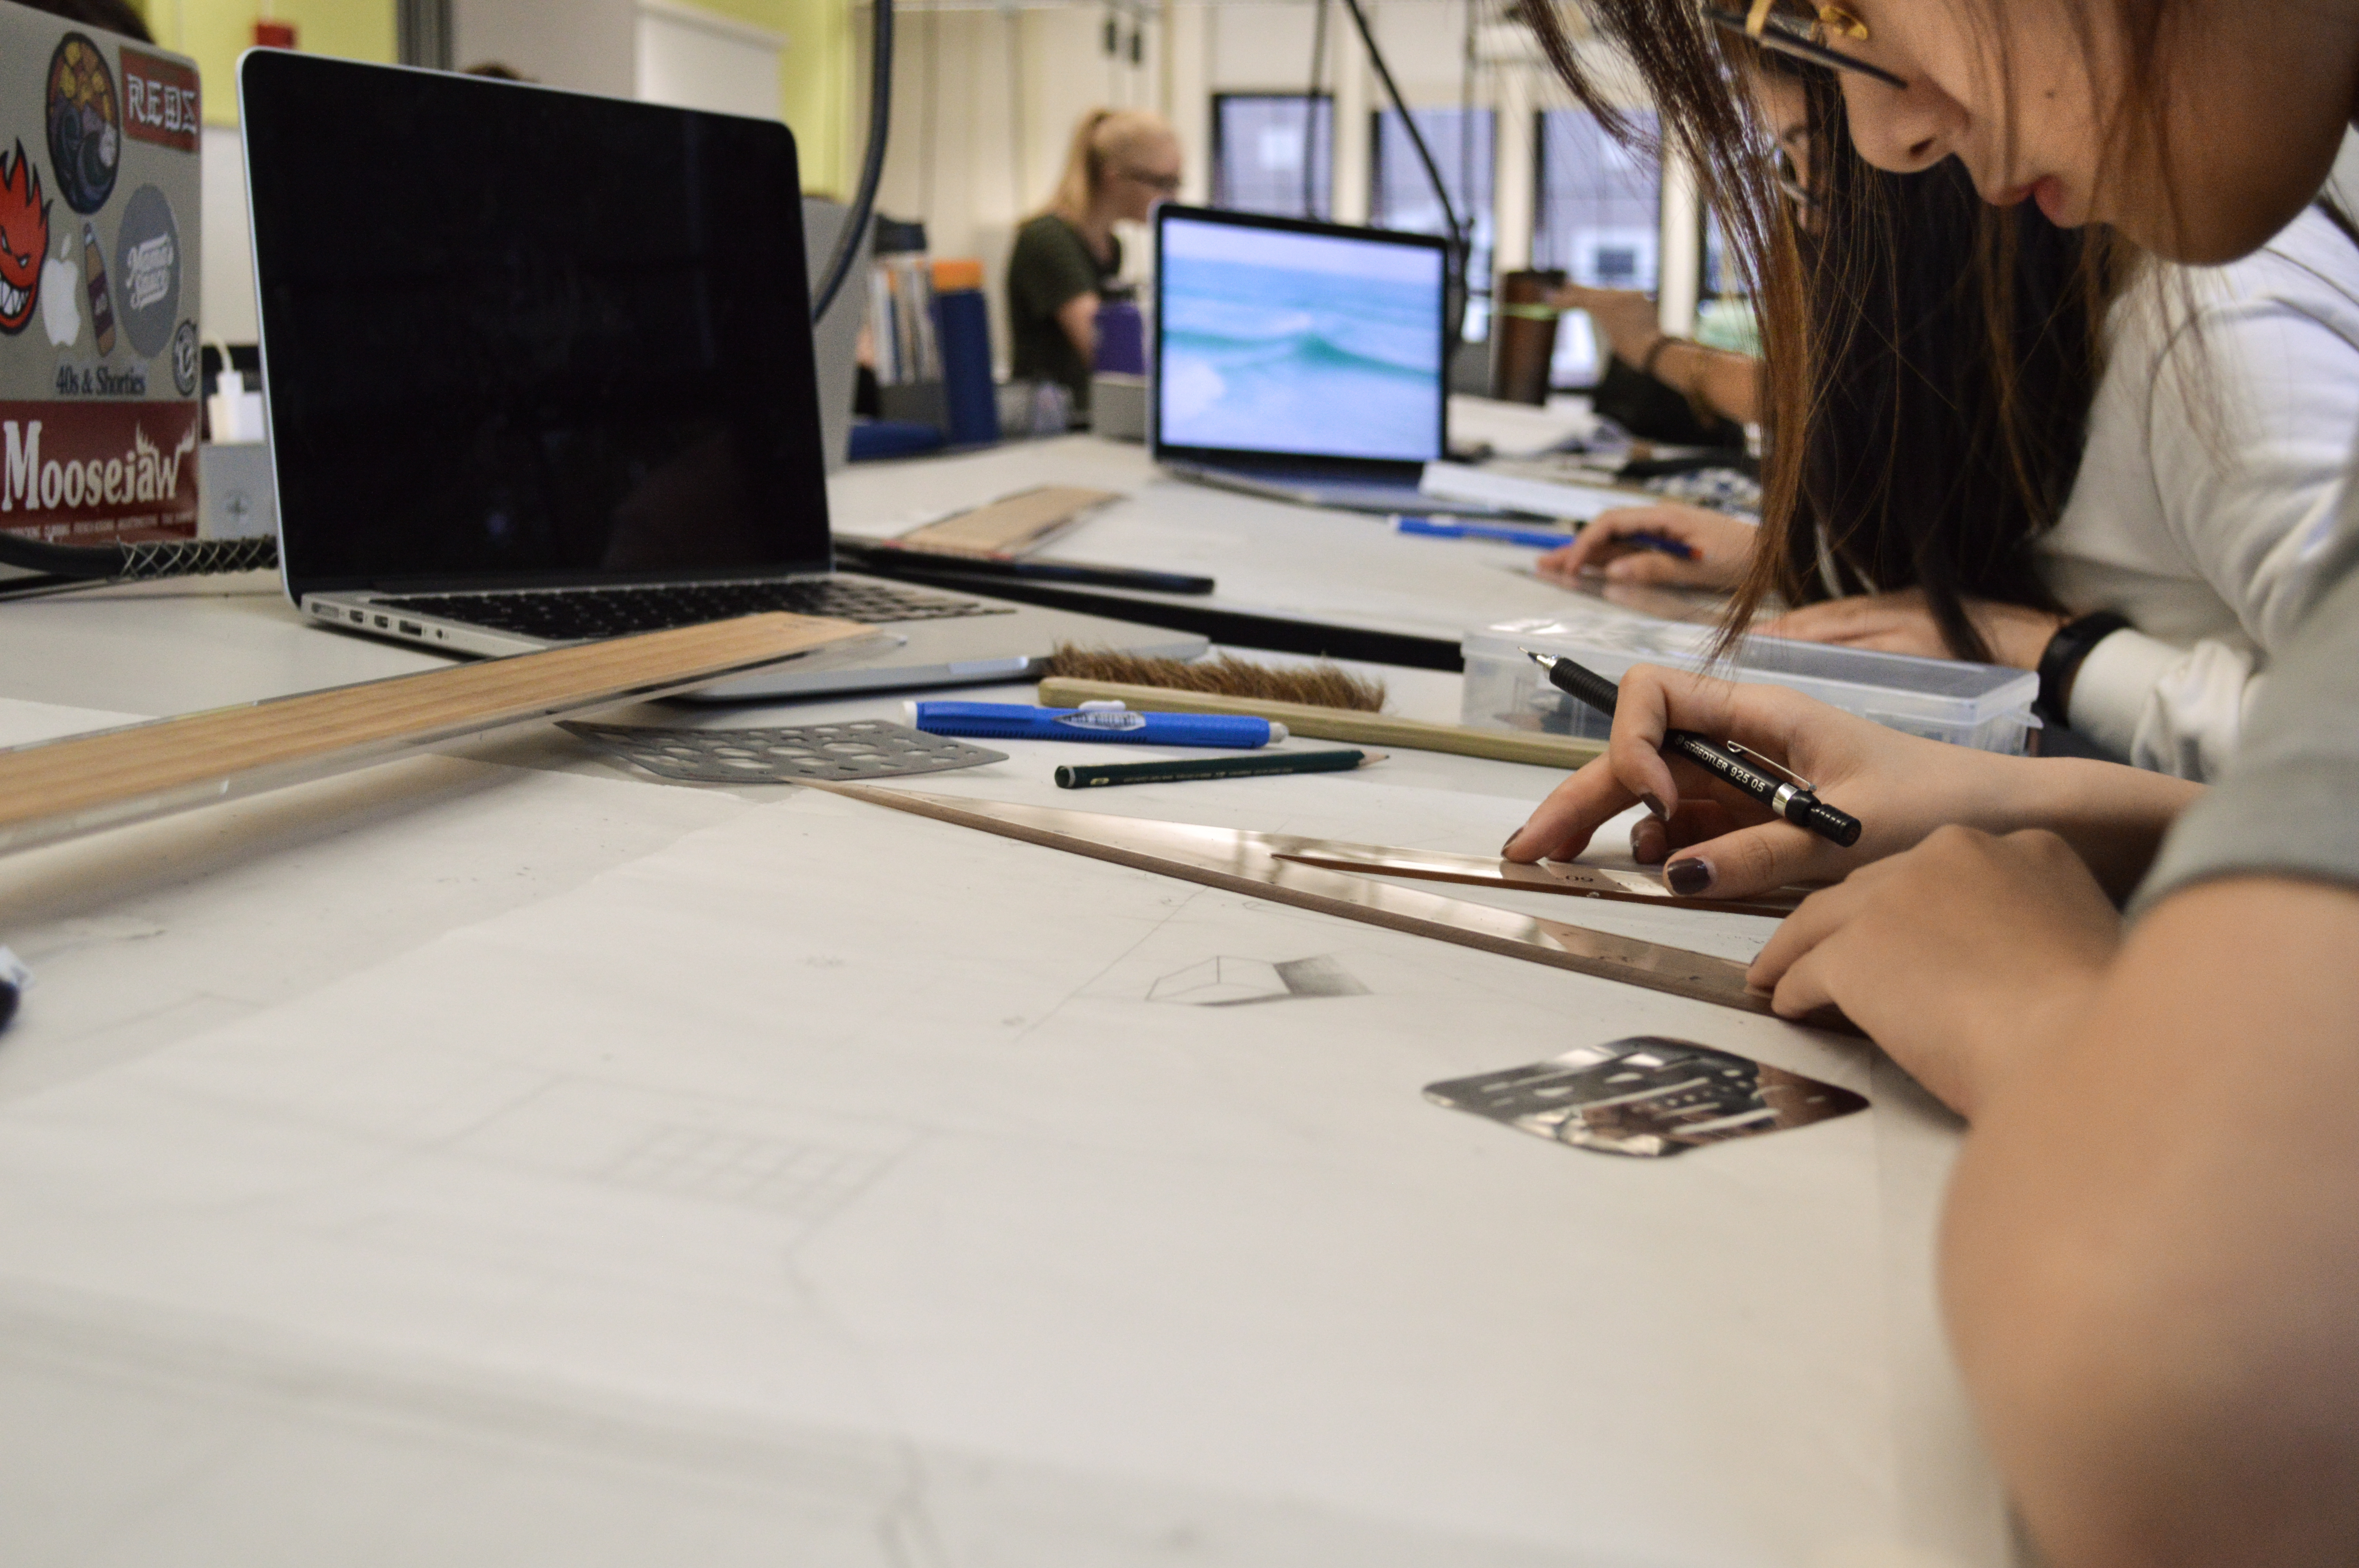 Interior Design students working on design rendering drawings in the classroom.